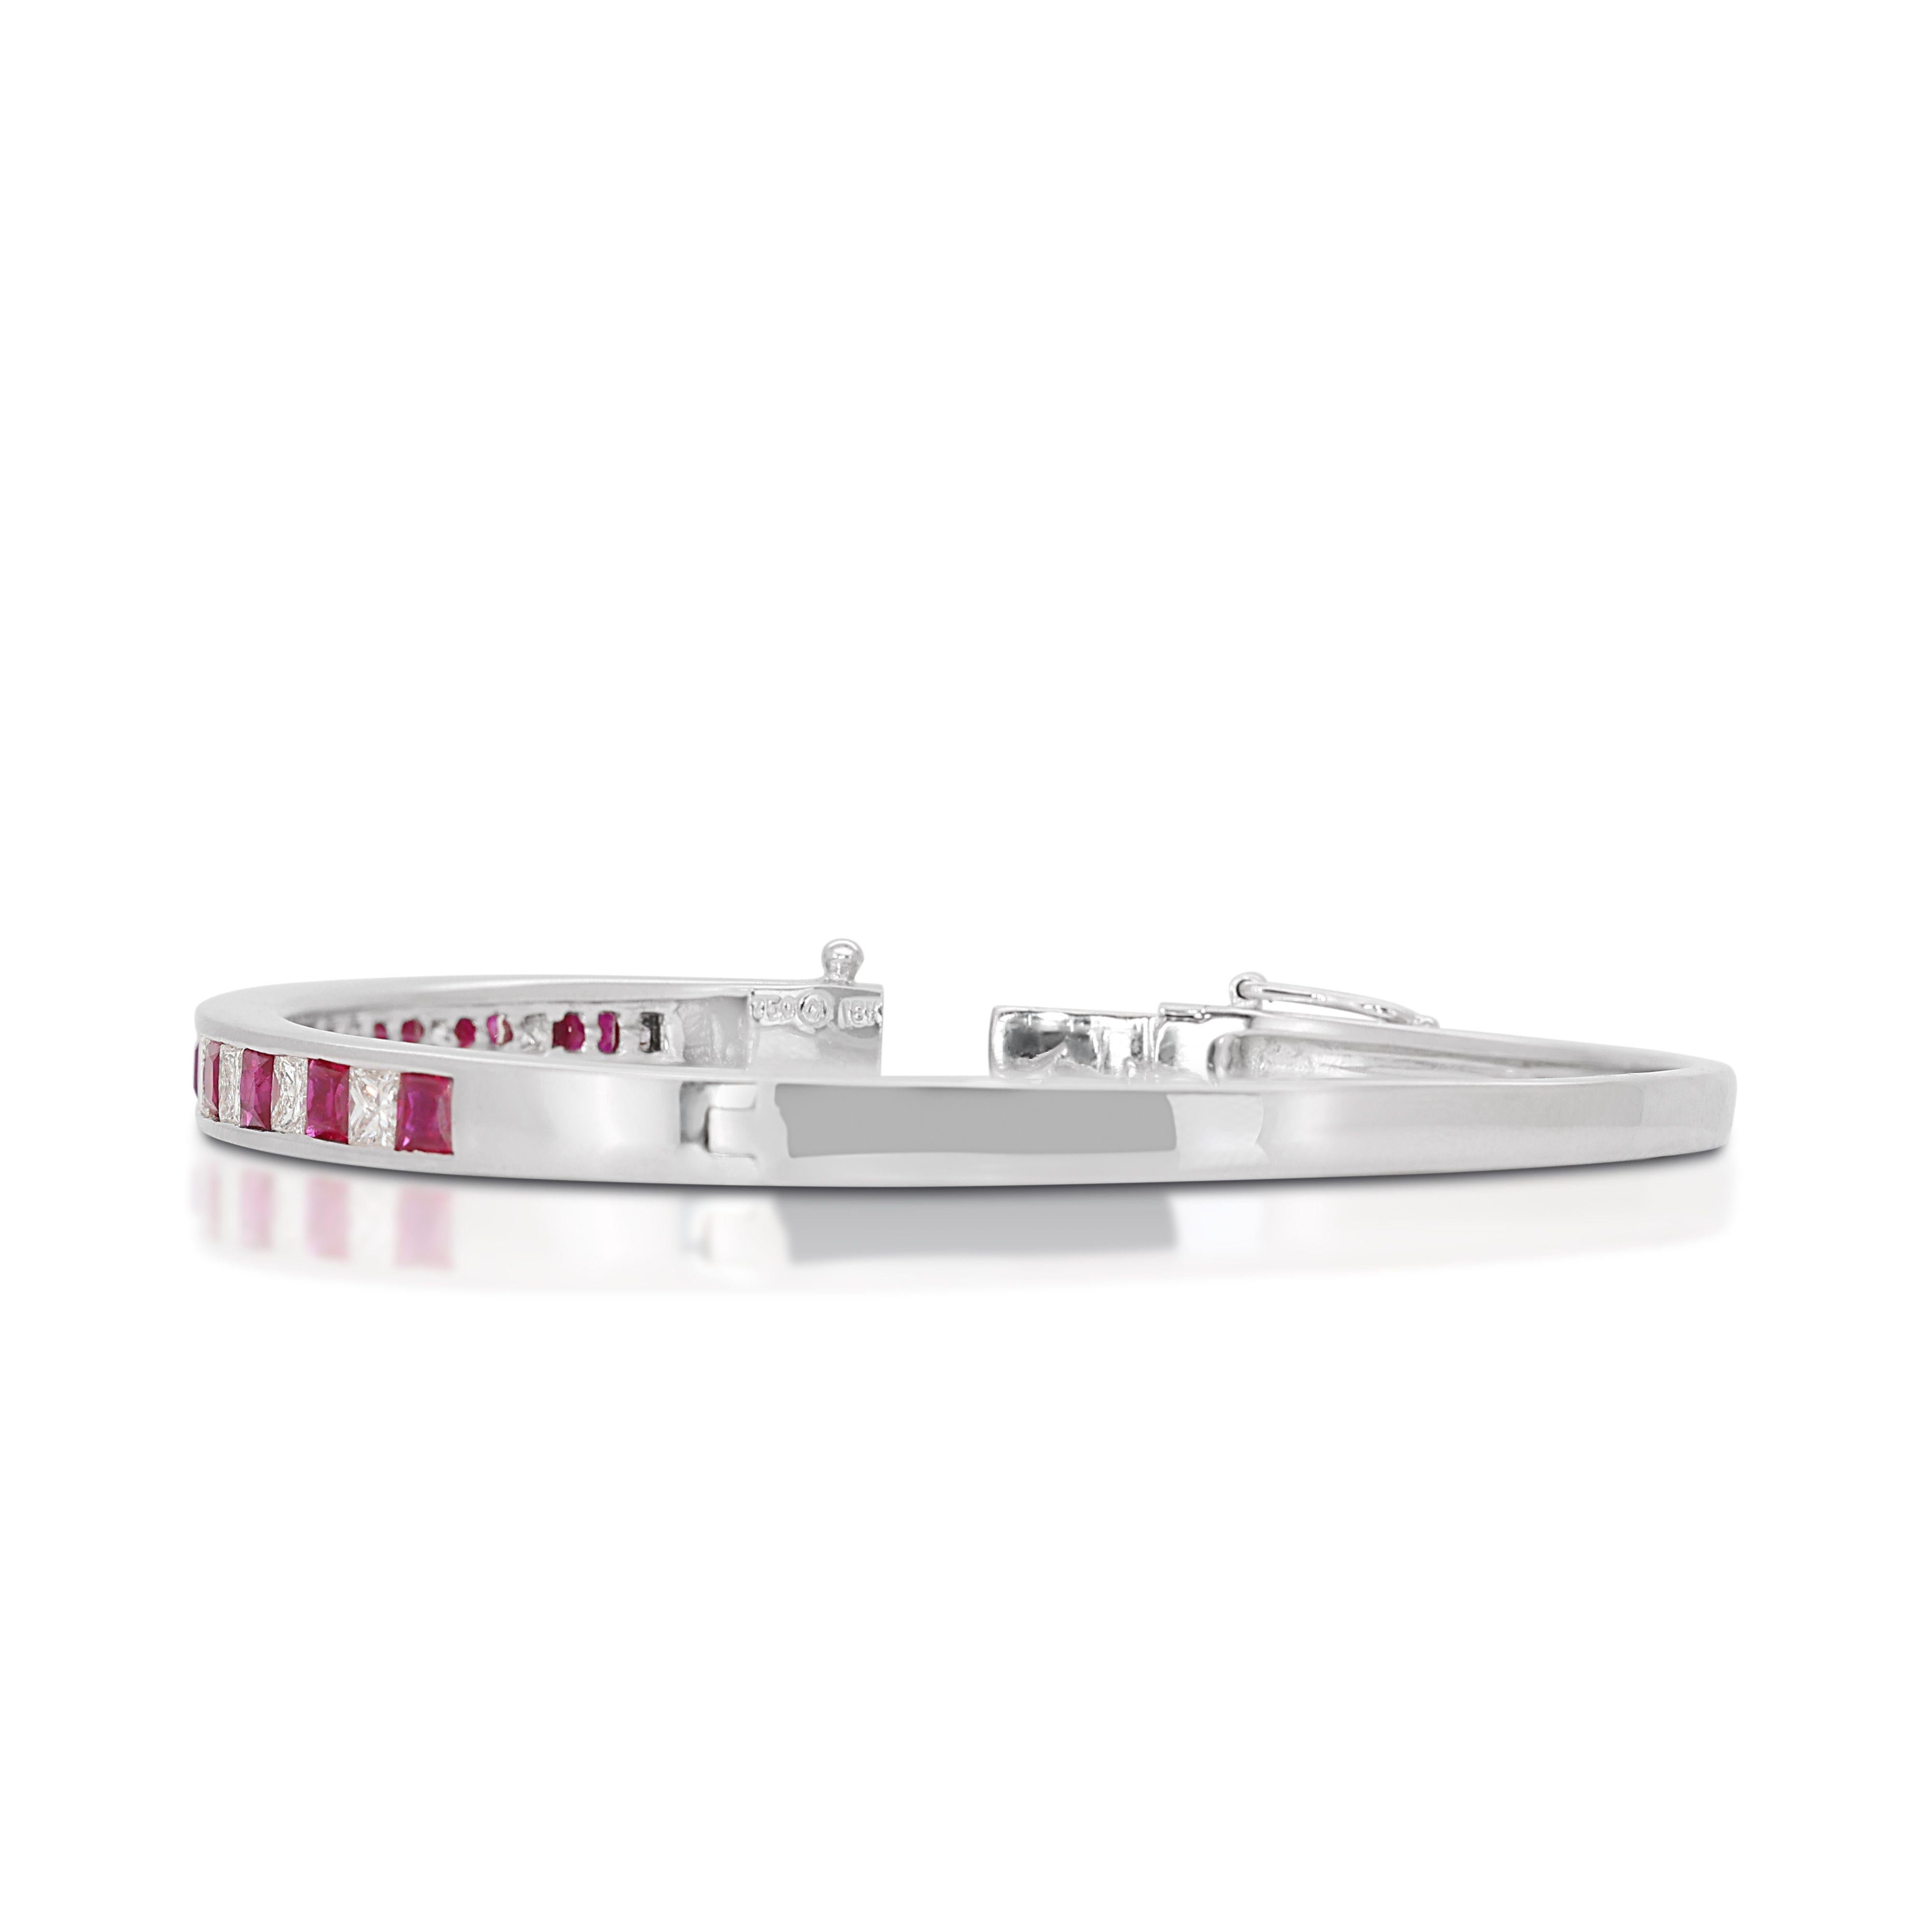 Dazzling 18k White Gold Bangle w/ 4ct Natural Rubies and Diamonds NGI Cert For Sale 1